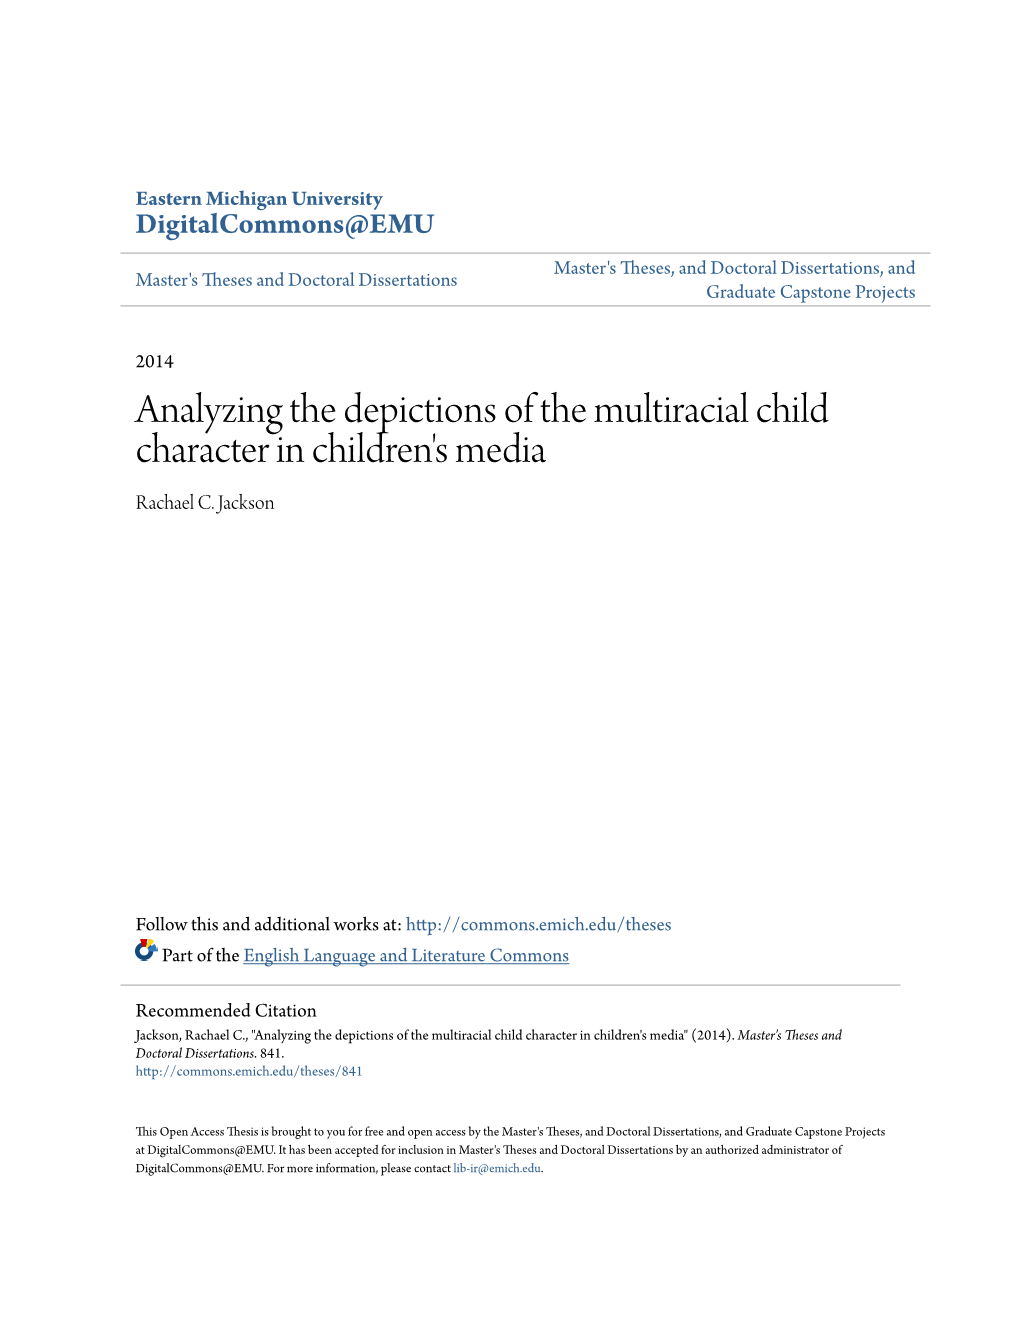 Analyzing the Depictions of the Multiracial Child Character in Children's Media Rachael C